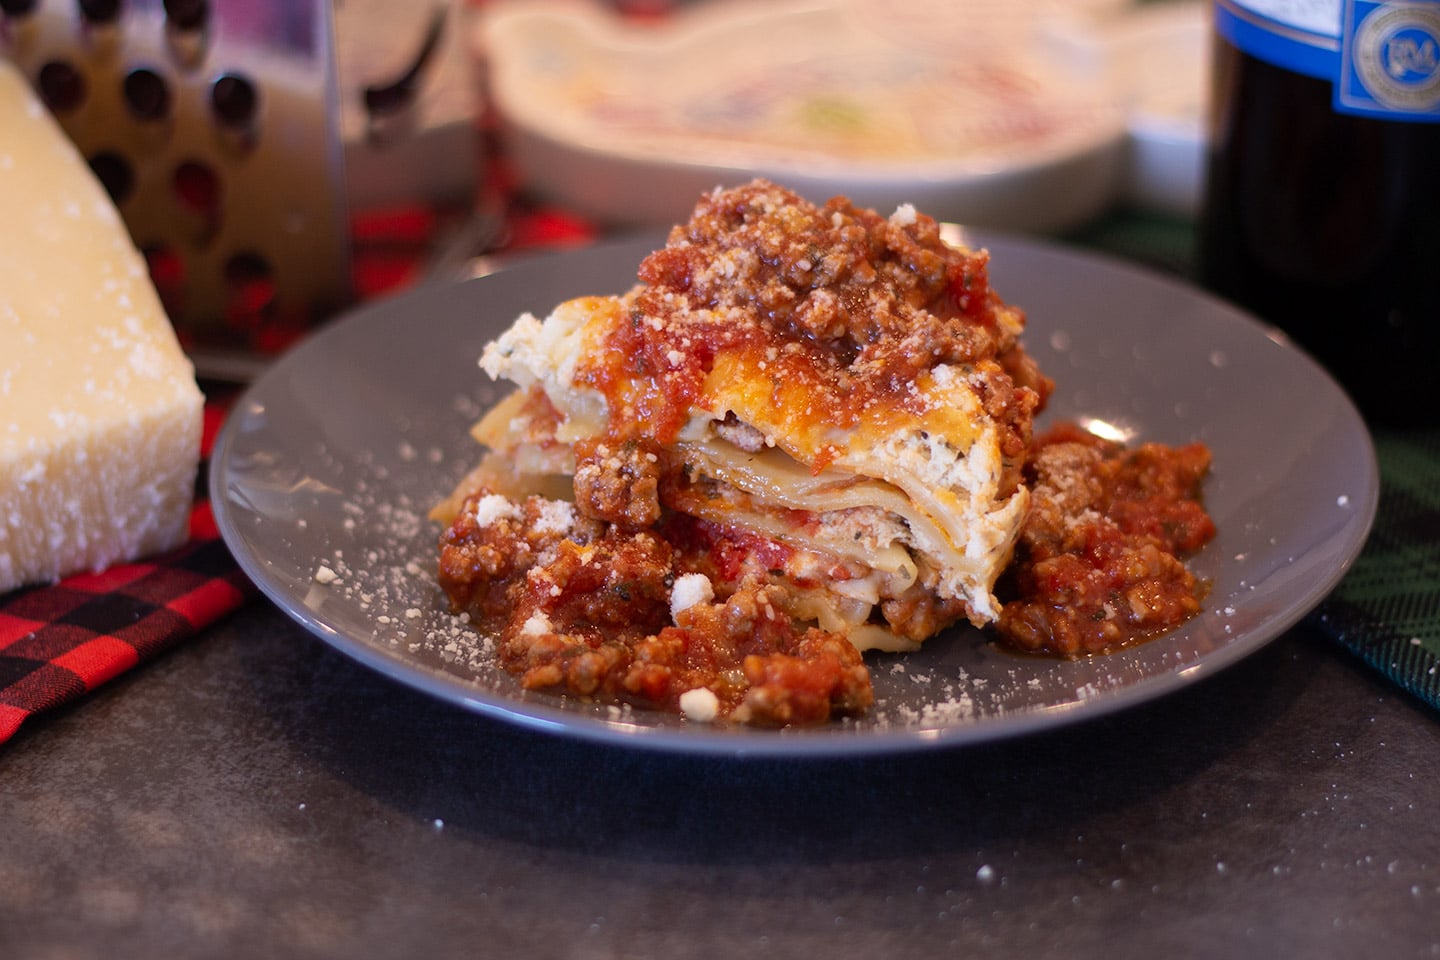 Lasagna with meat sauce on a grey plate